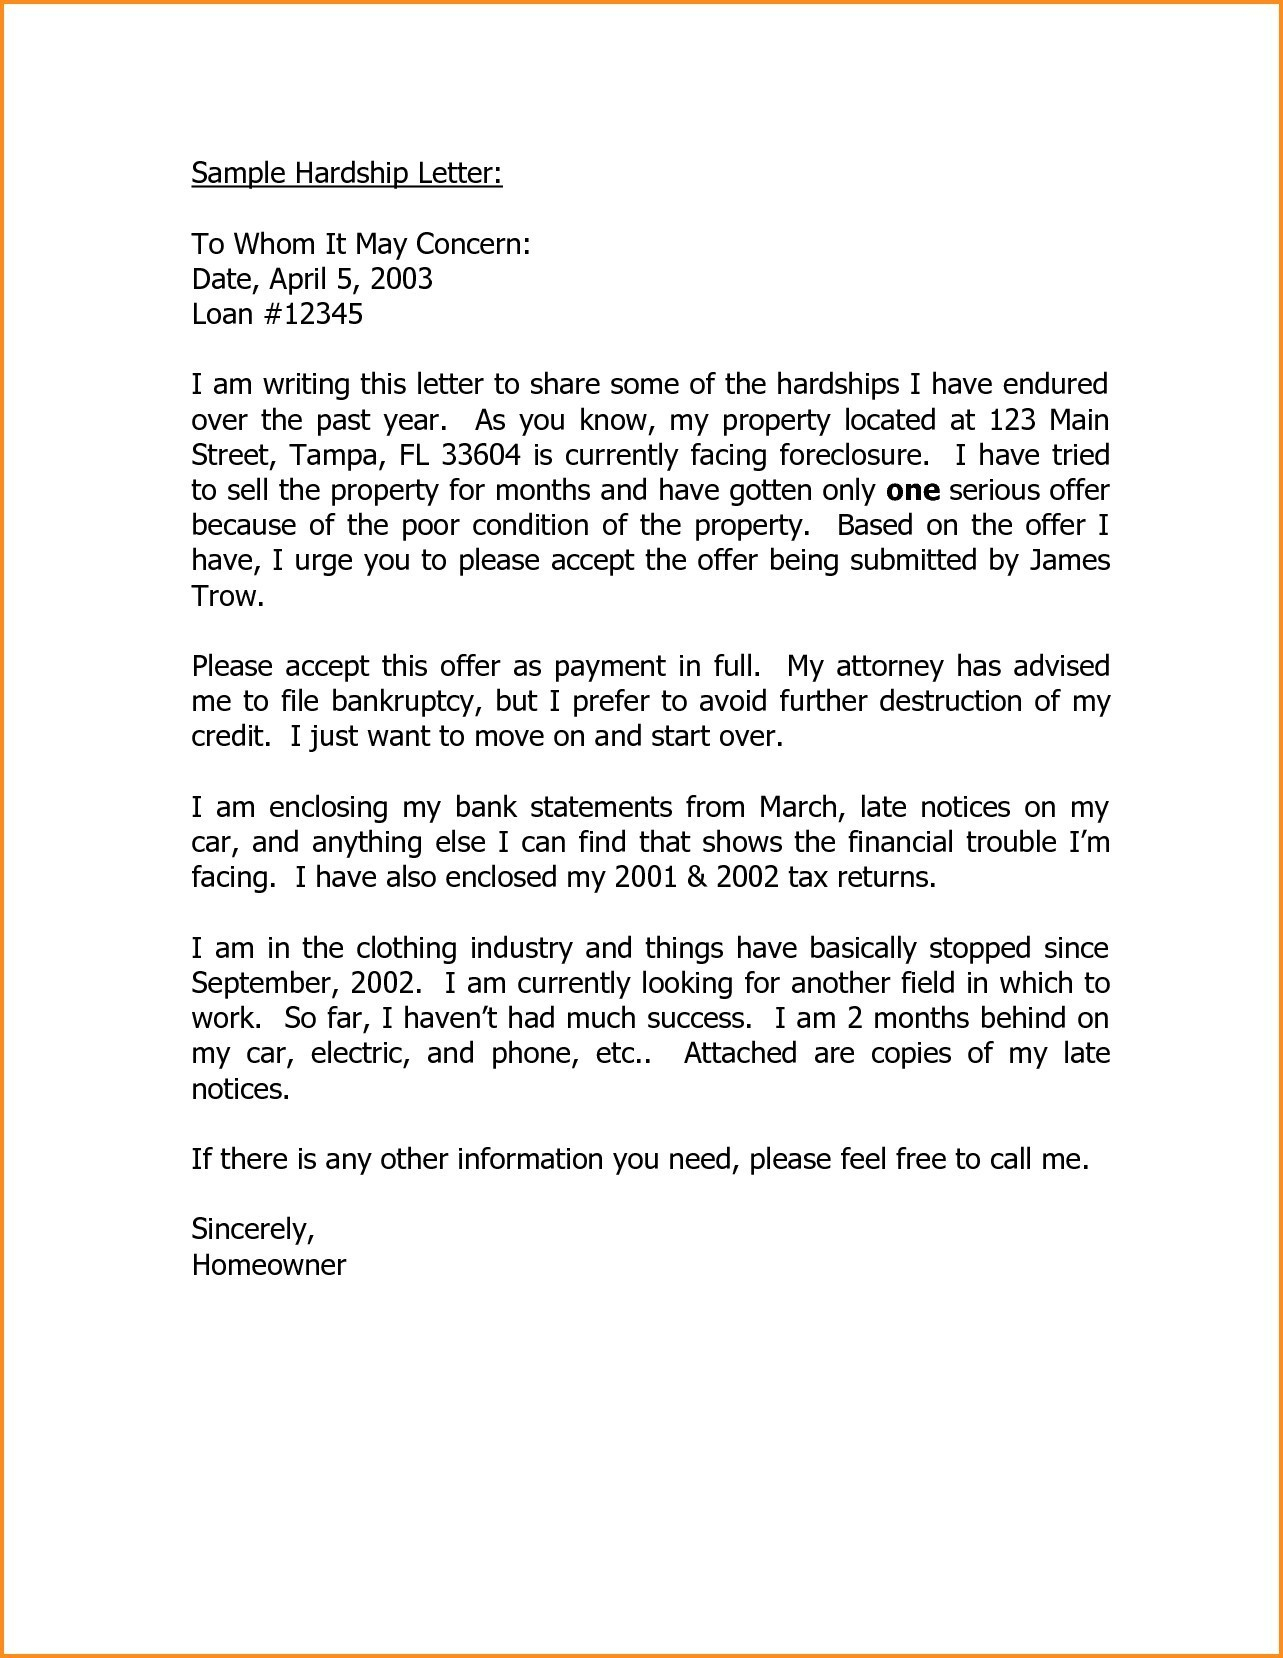 to whom it may concern job letter sample